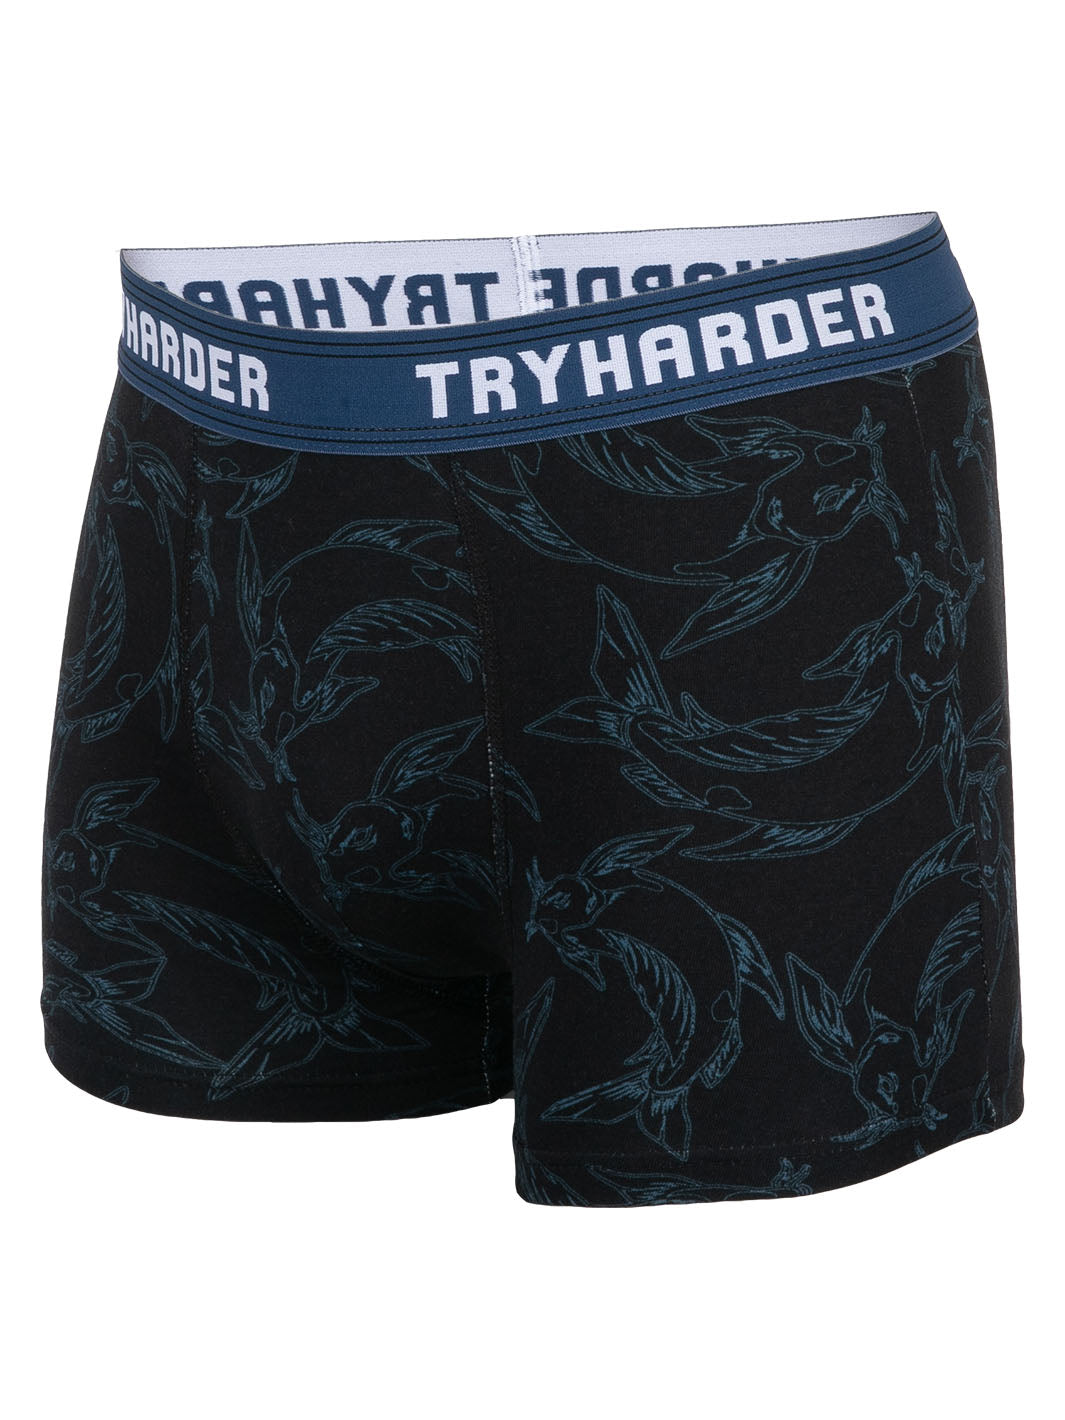 TRYHARDER - Boxer - Fish Navy 1 pack